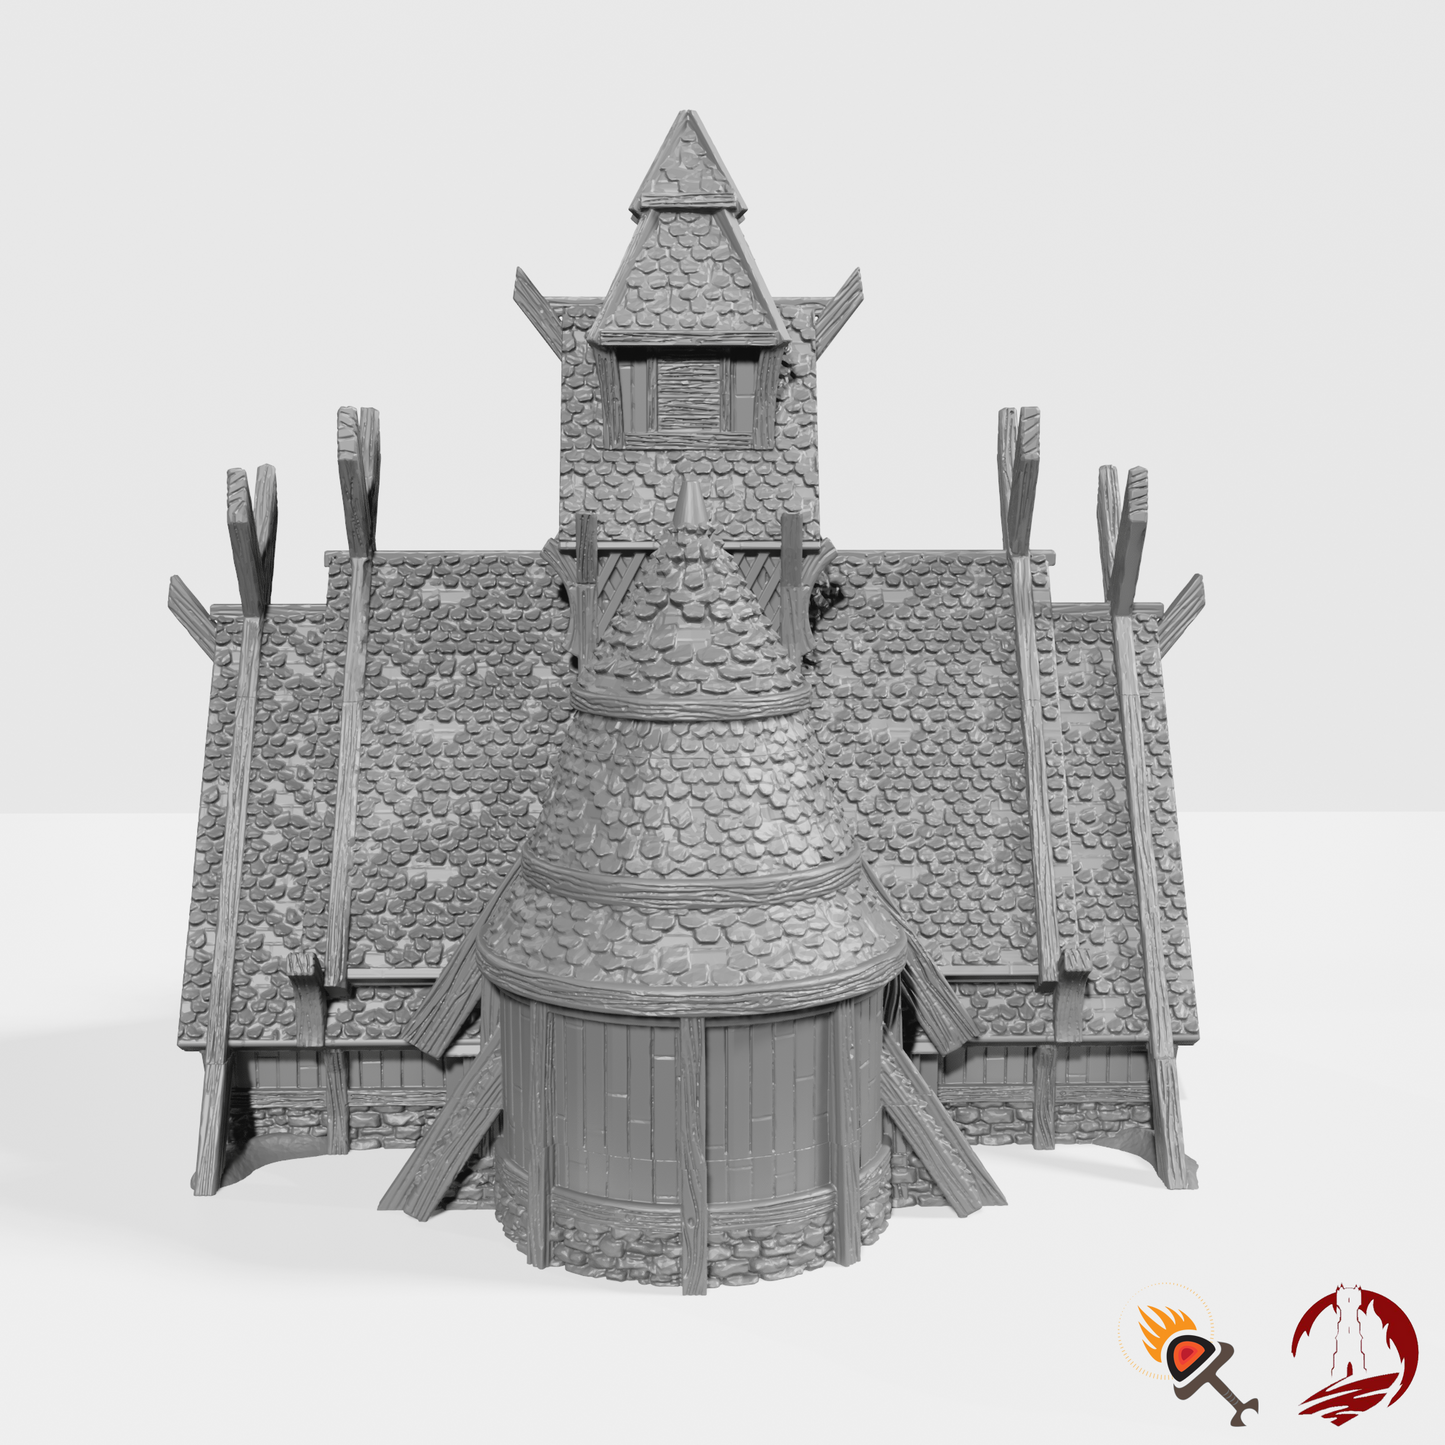 Odingard Norse Stave Church 28mm for D&D Terrain, DnD Pathfinder Fantasy Barbarian Viking, Dark Realms, Gift for Tabletop Gamers